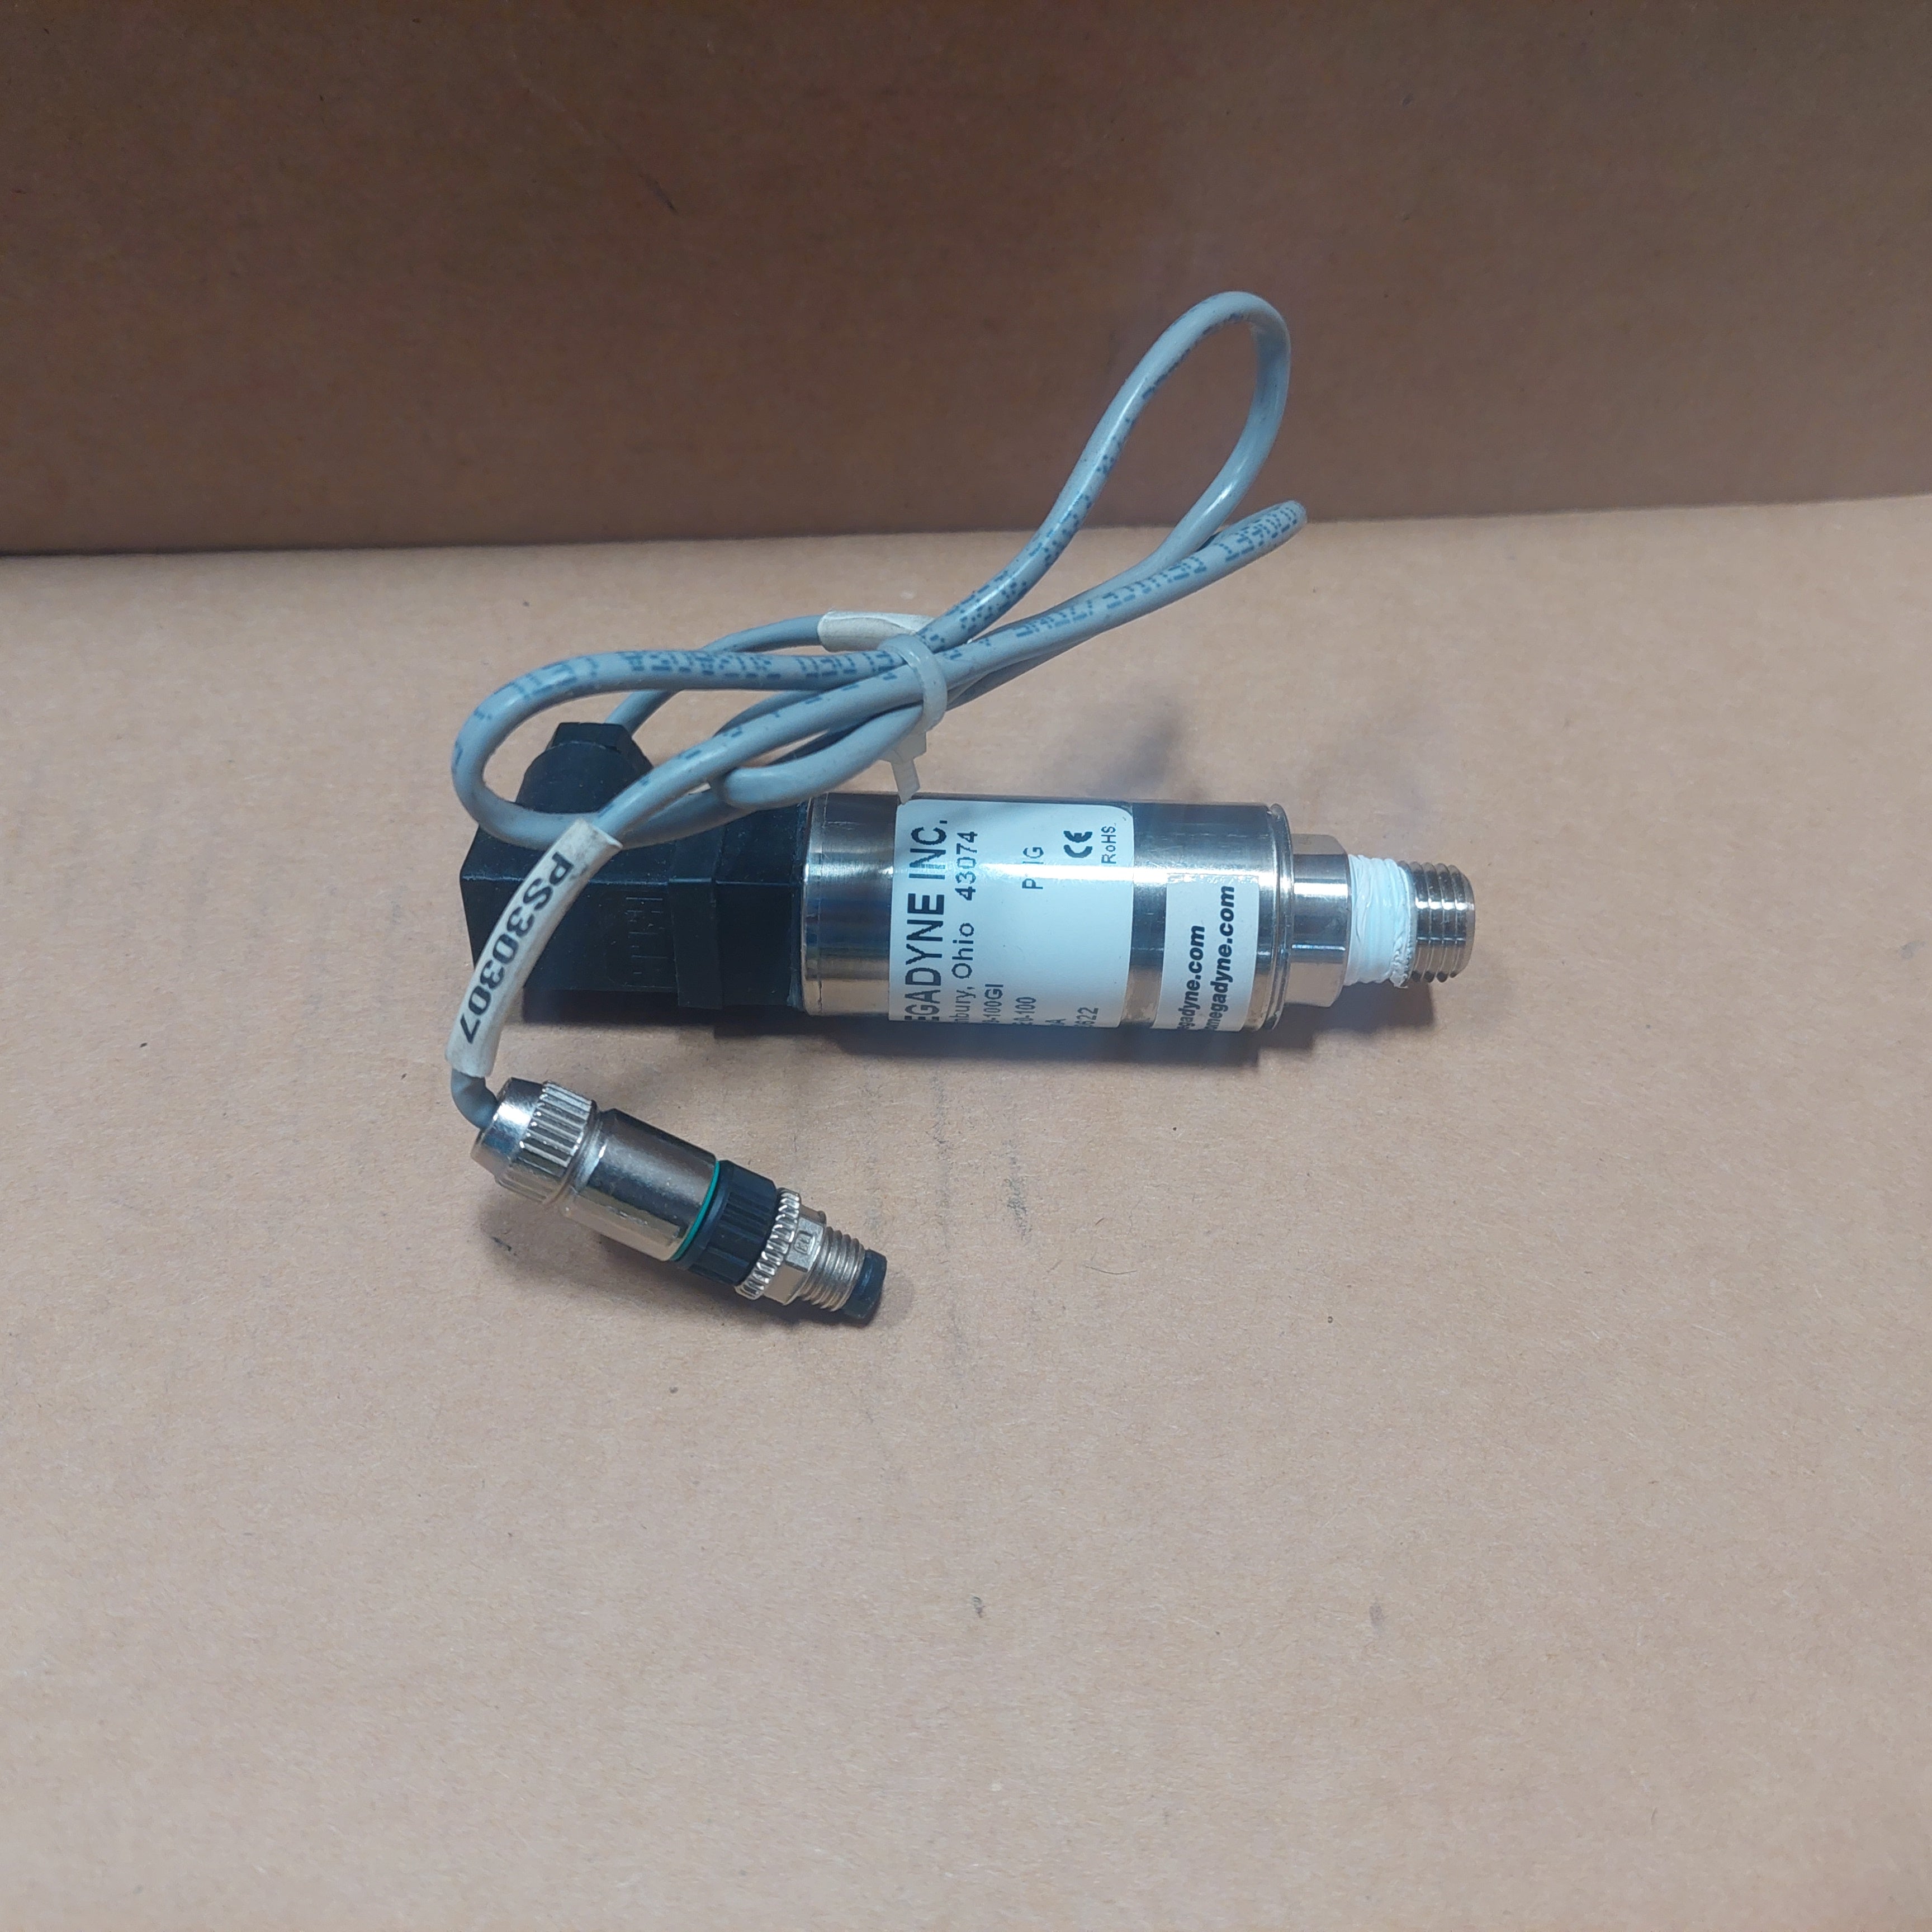 Omegadyne PX219-100GI Pressure Transducer (0-100 psi) w/ Interface Cable Used